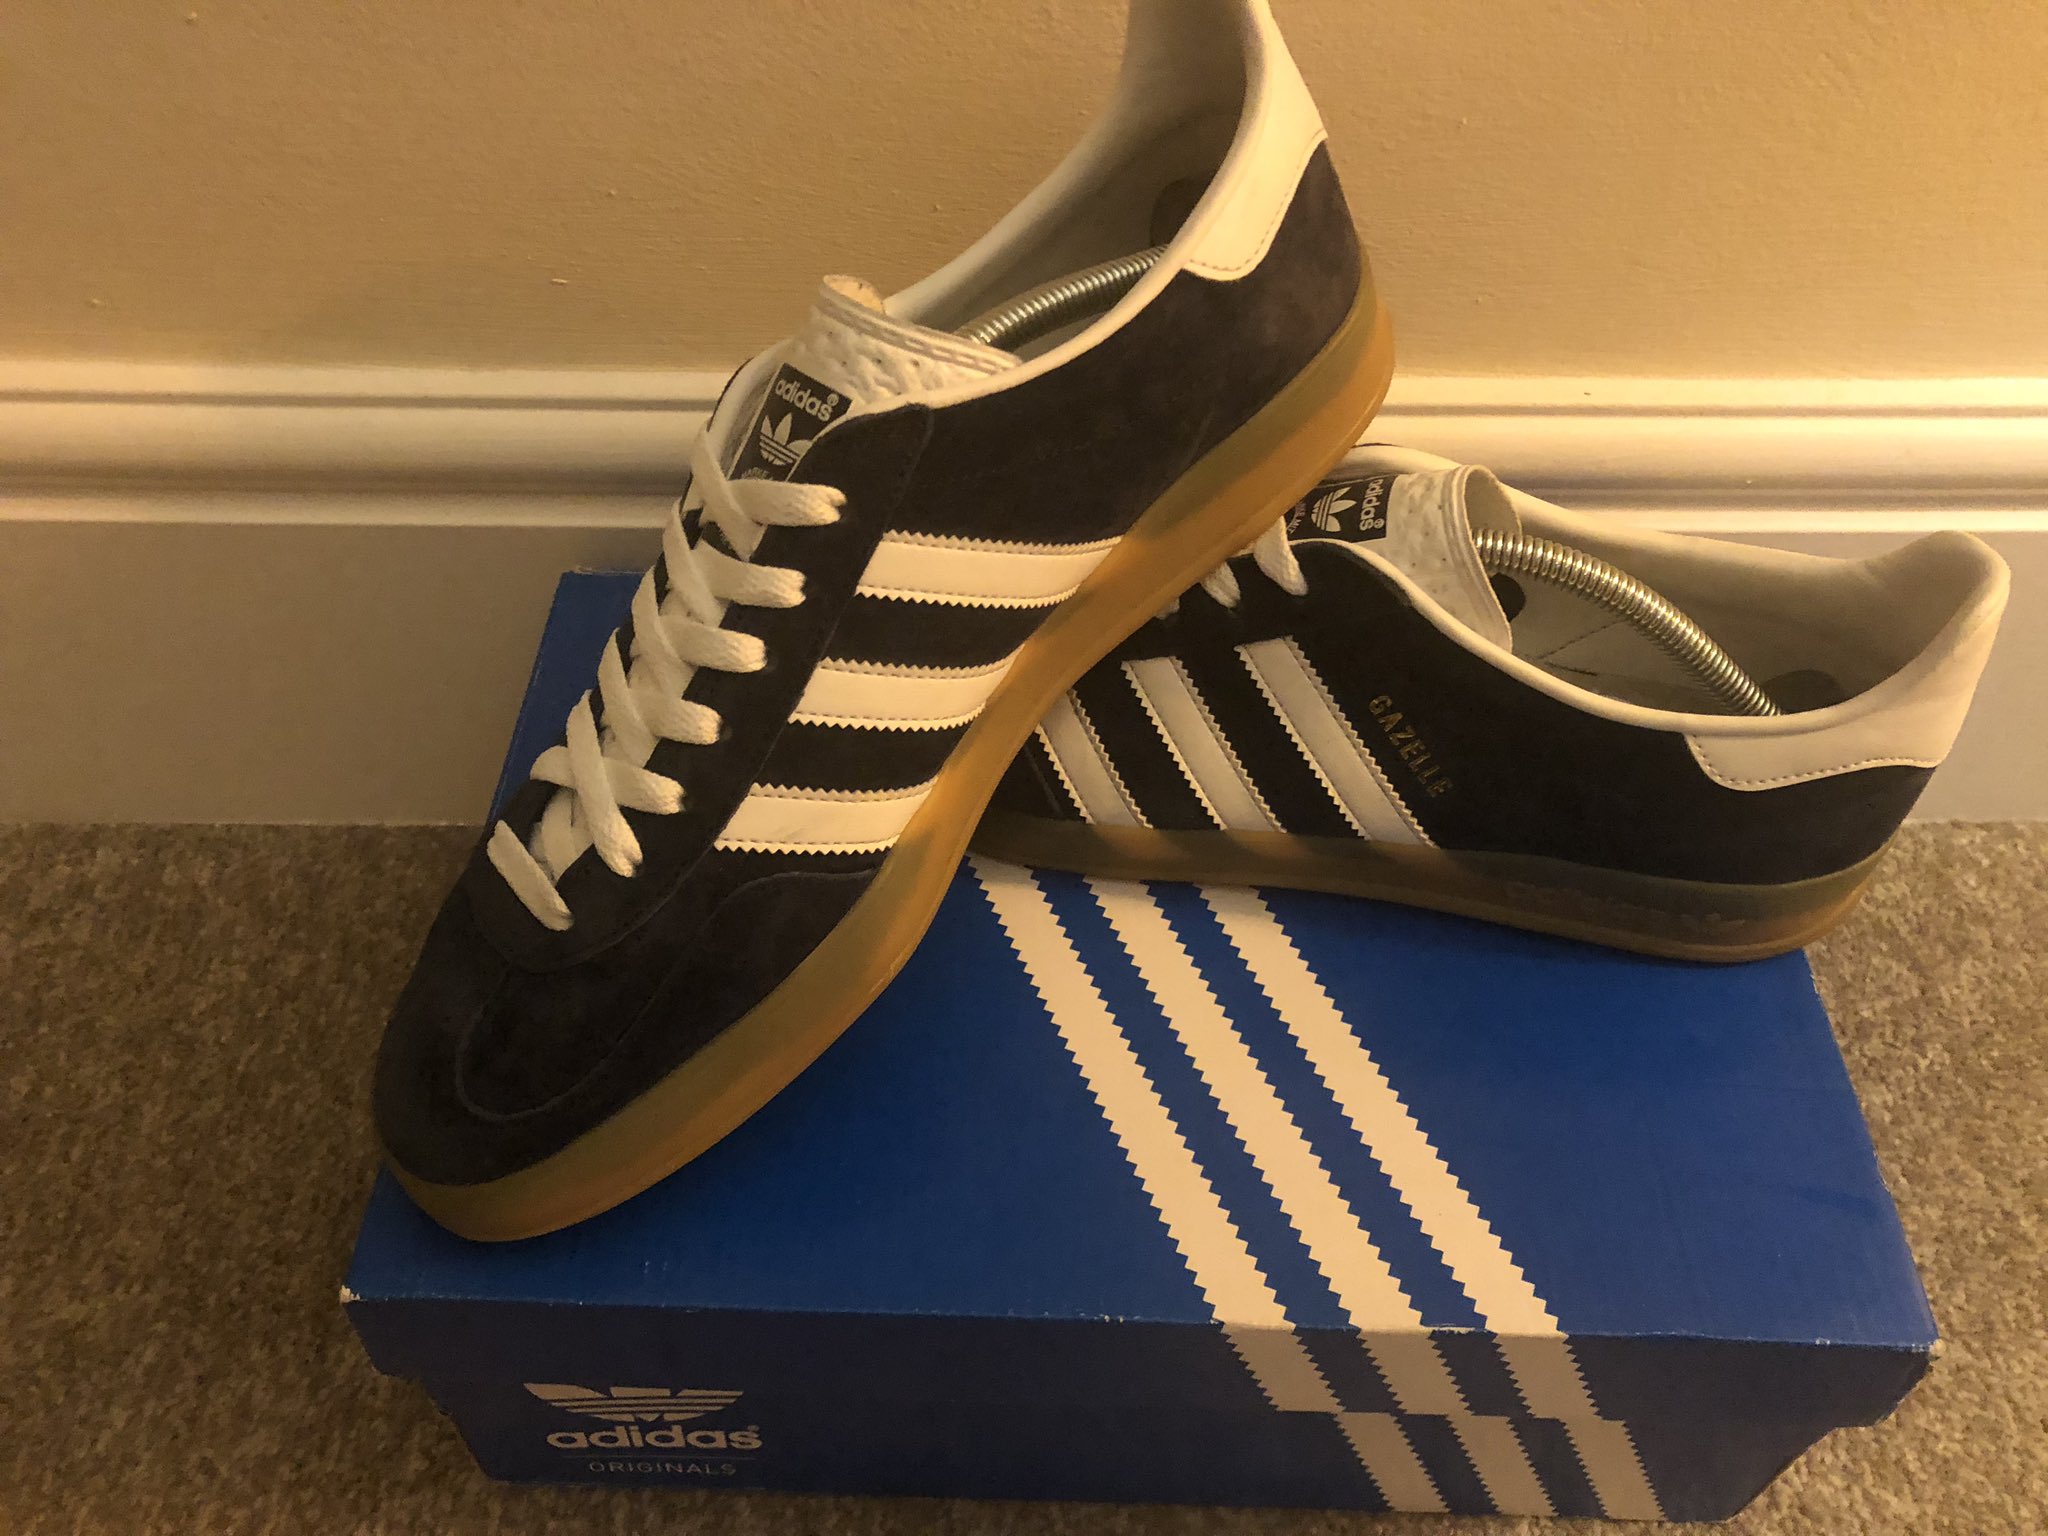 Chicle Descortés escritorio Indie Rob on Twitter: "Gazelle Indoor with new white laces /// #Gazelles # Adidas https://t.co/Rw5FHUqbUz" / Twitter